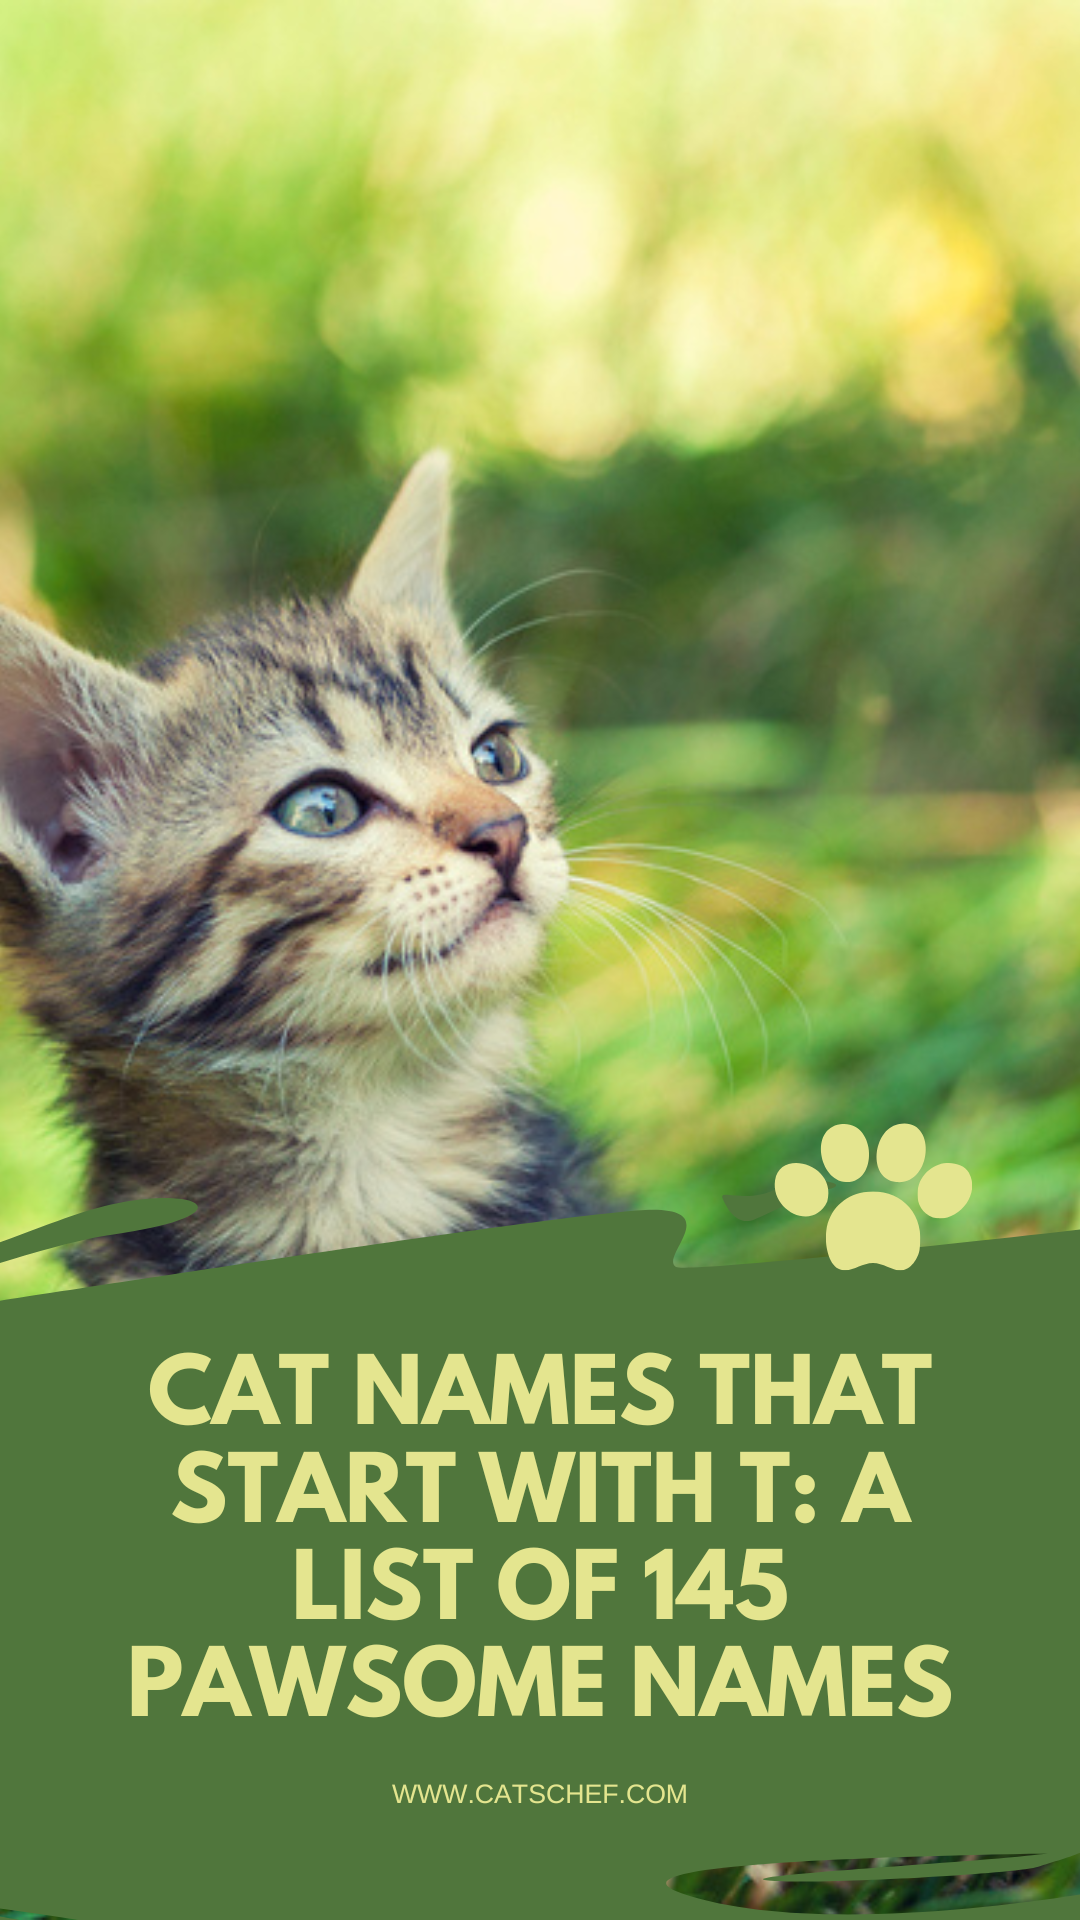 Cat Names That Start With T: A List Of 145 Pawsome Names